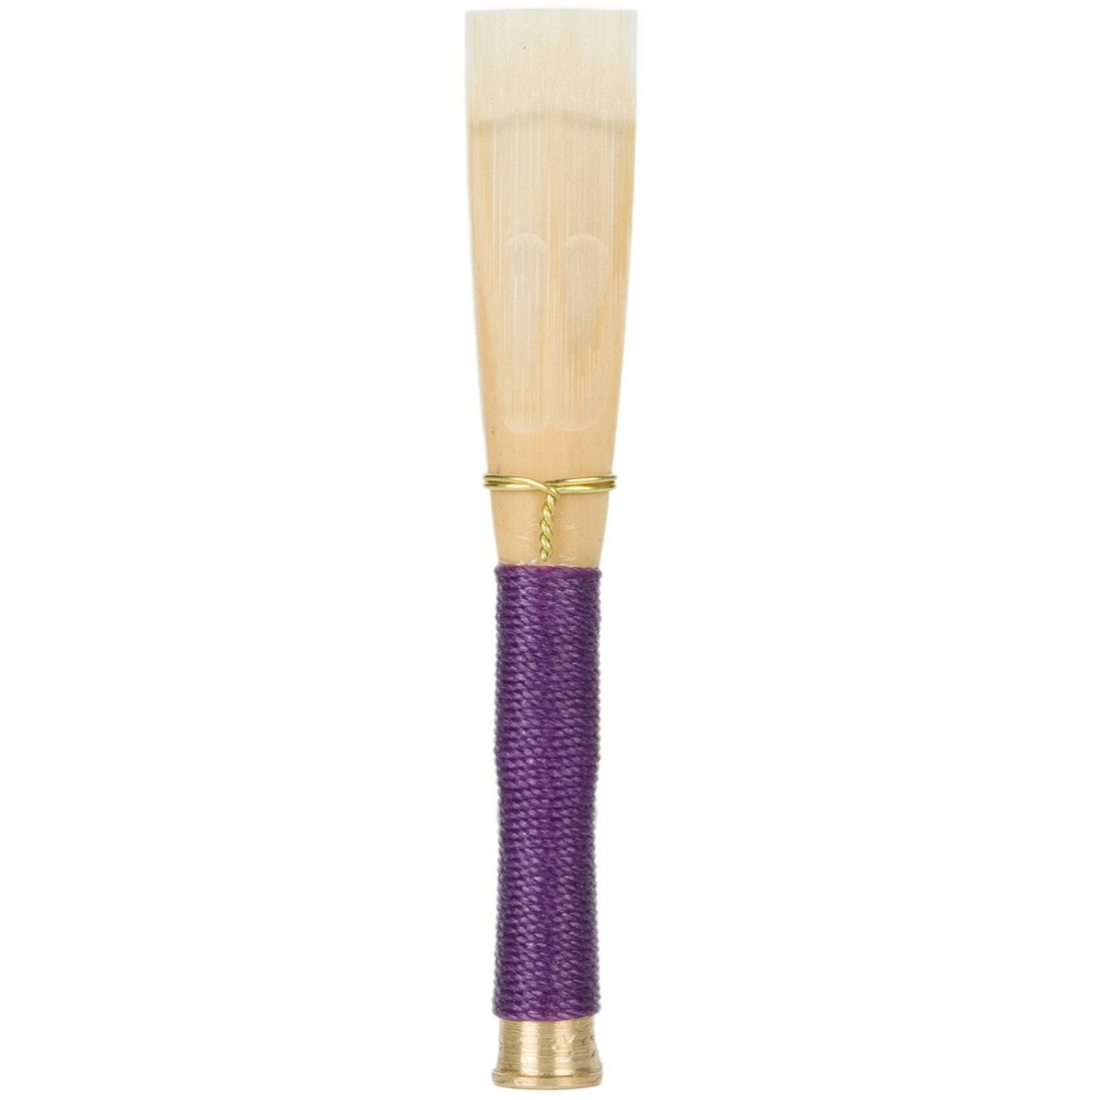 Jones Artist series English Horn Reed cane wound with purple string - strength of Medium